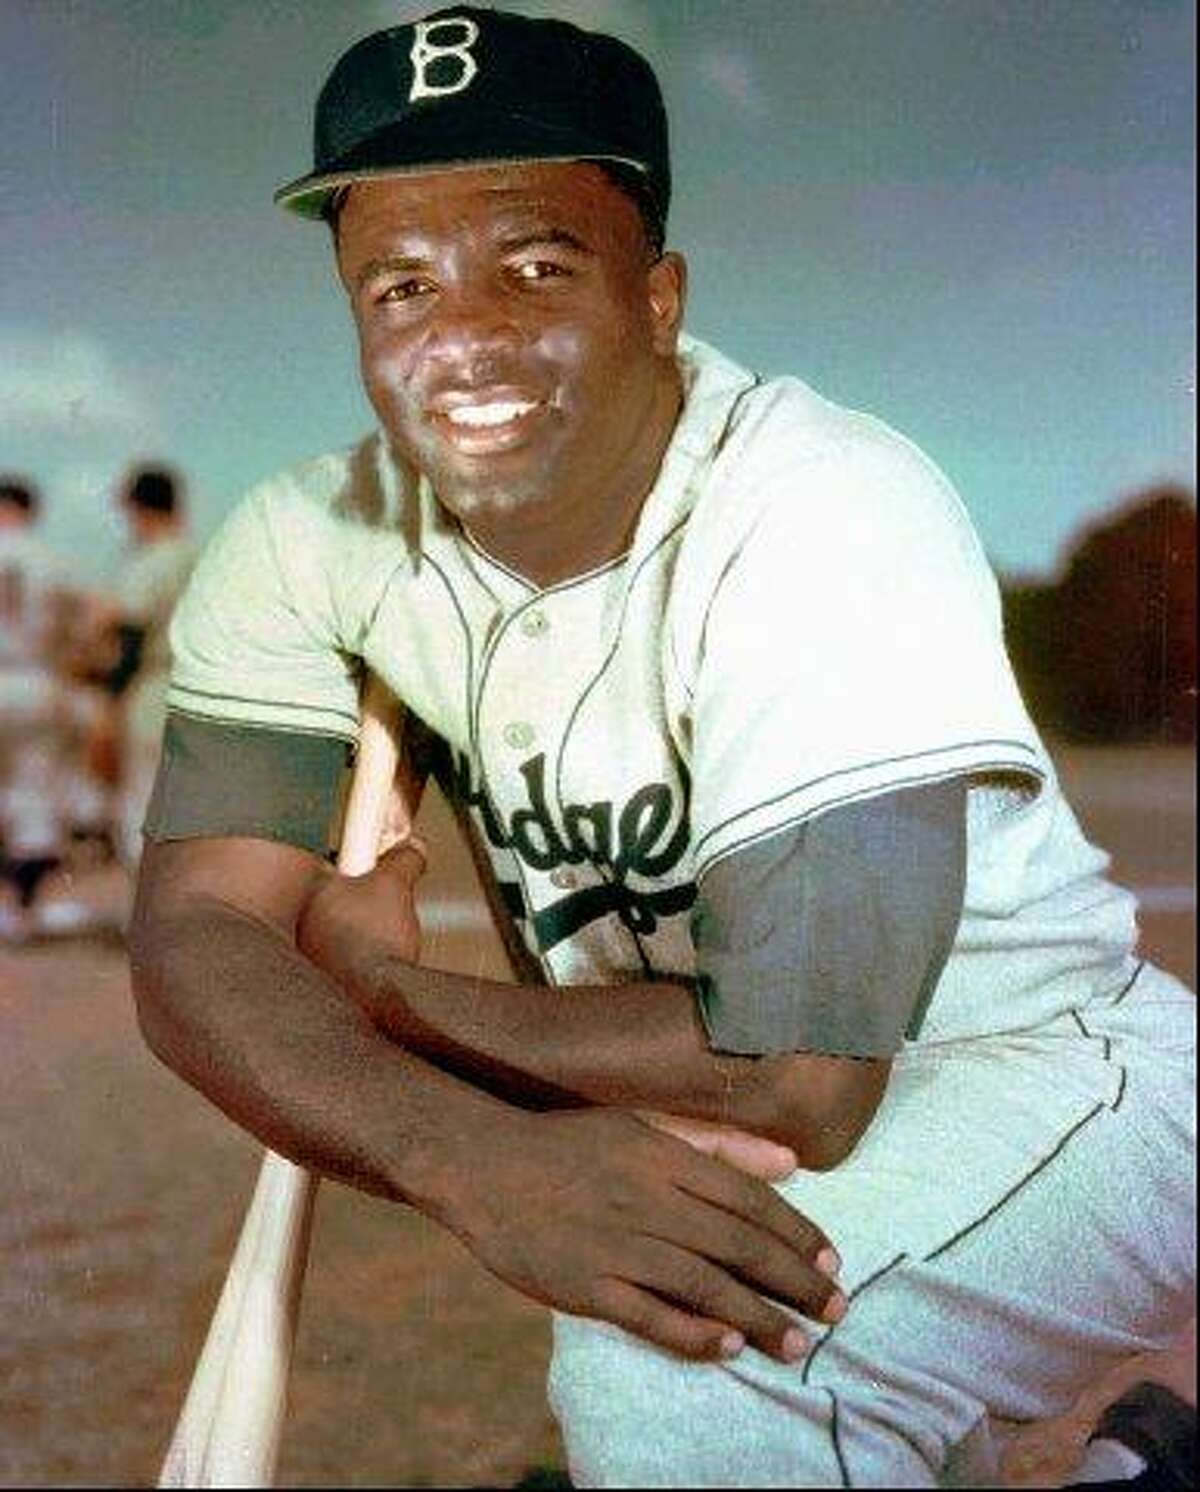 Brooklyn Dodgers’ legend Jackie Robinson poses in 1952.